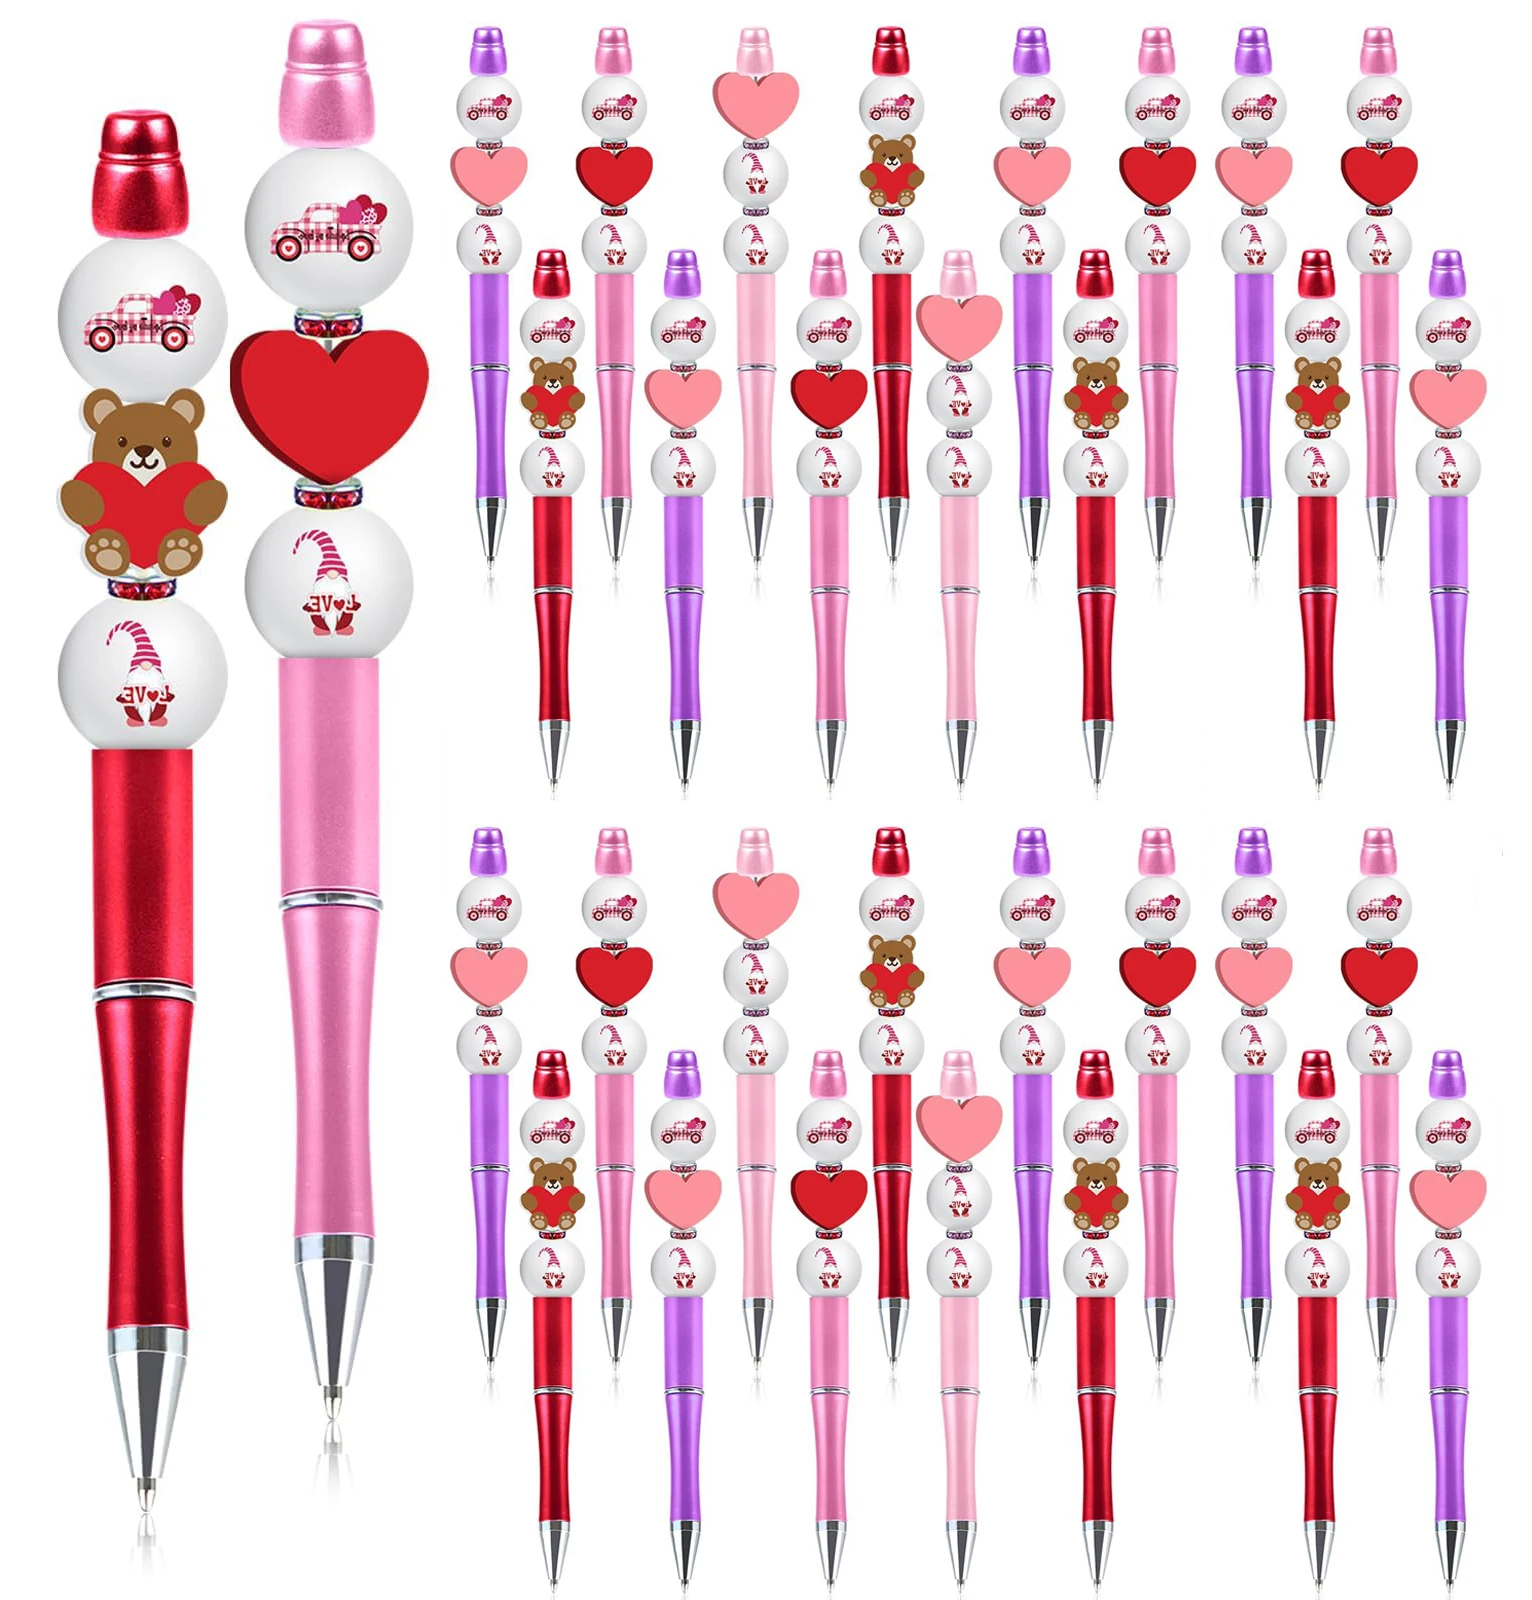 

40PCS Heart Shaped Ballpoint Pens Novelty Gel Ink Pens For Student Teacher Office School Home Supplies Party Favors Gifts